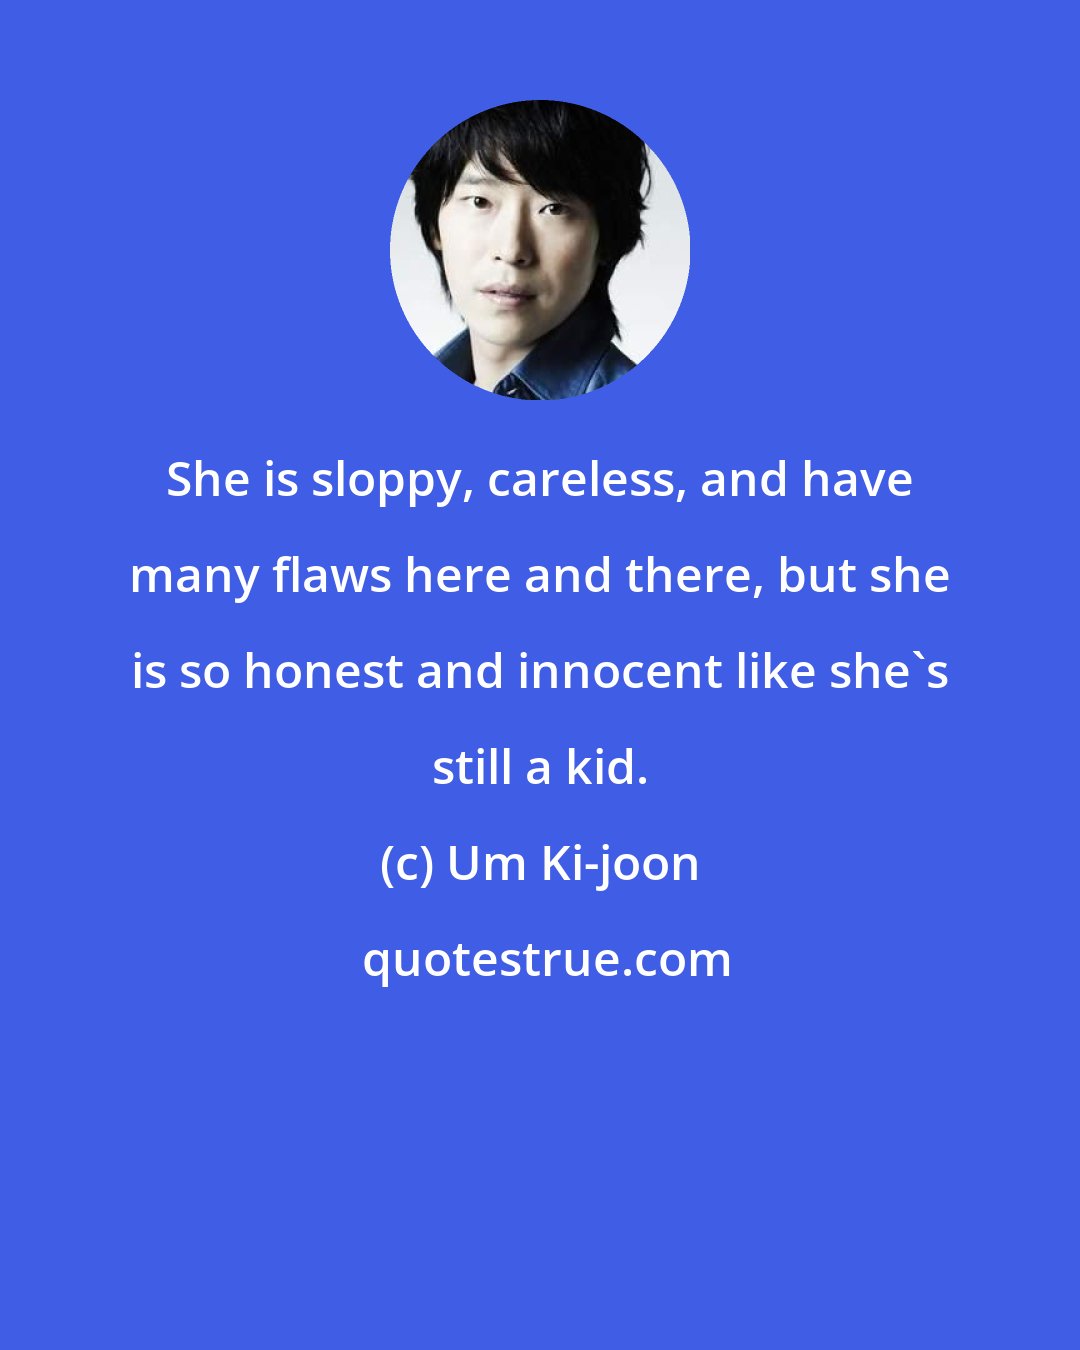 Um Ki-joon: She is sloppy, careless, and have many flaws here and there, but she is so honest and innocent like she's still a kid.